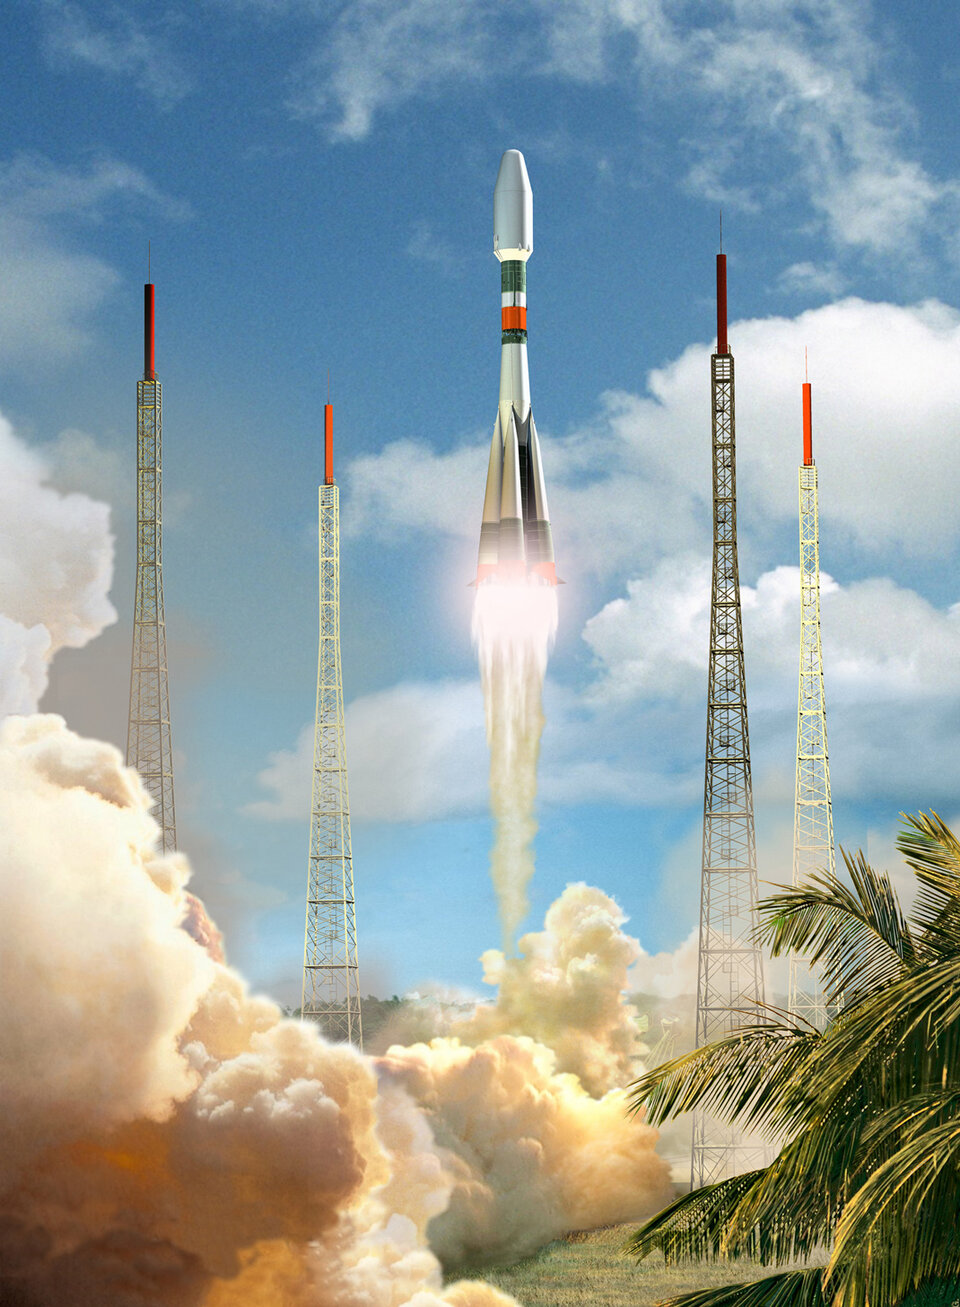 Artist's impression of Soyuz lifting off from Europe's Spaceport